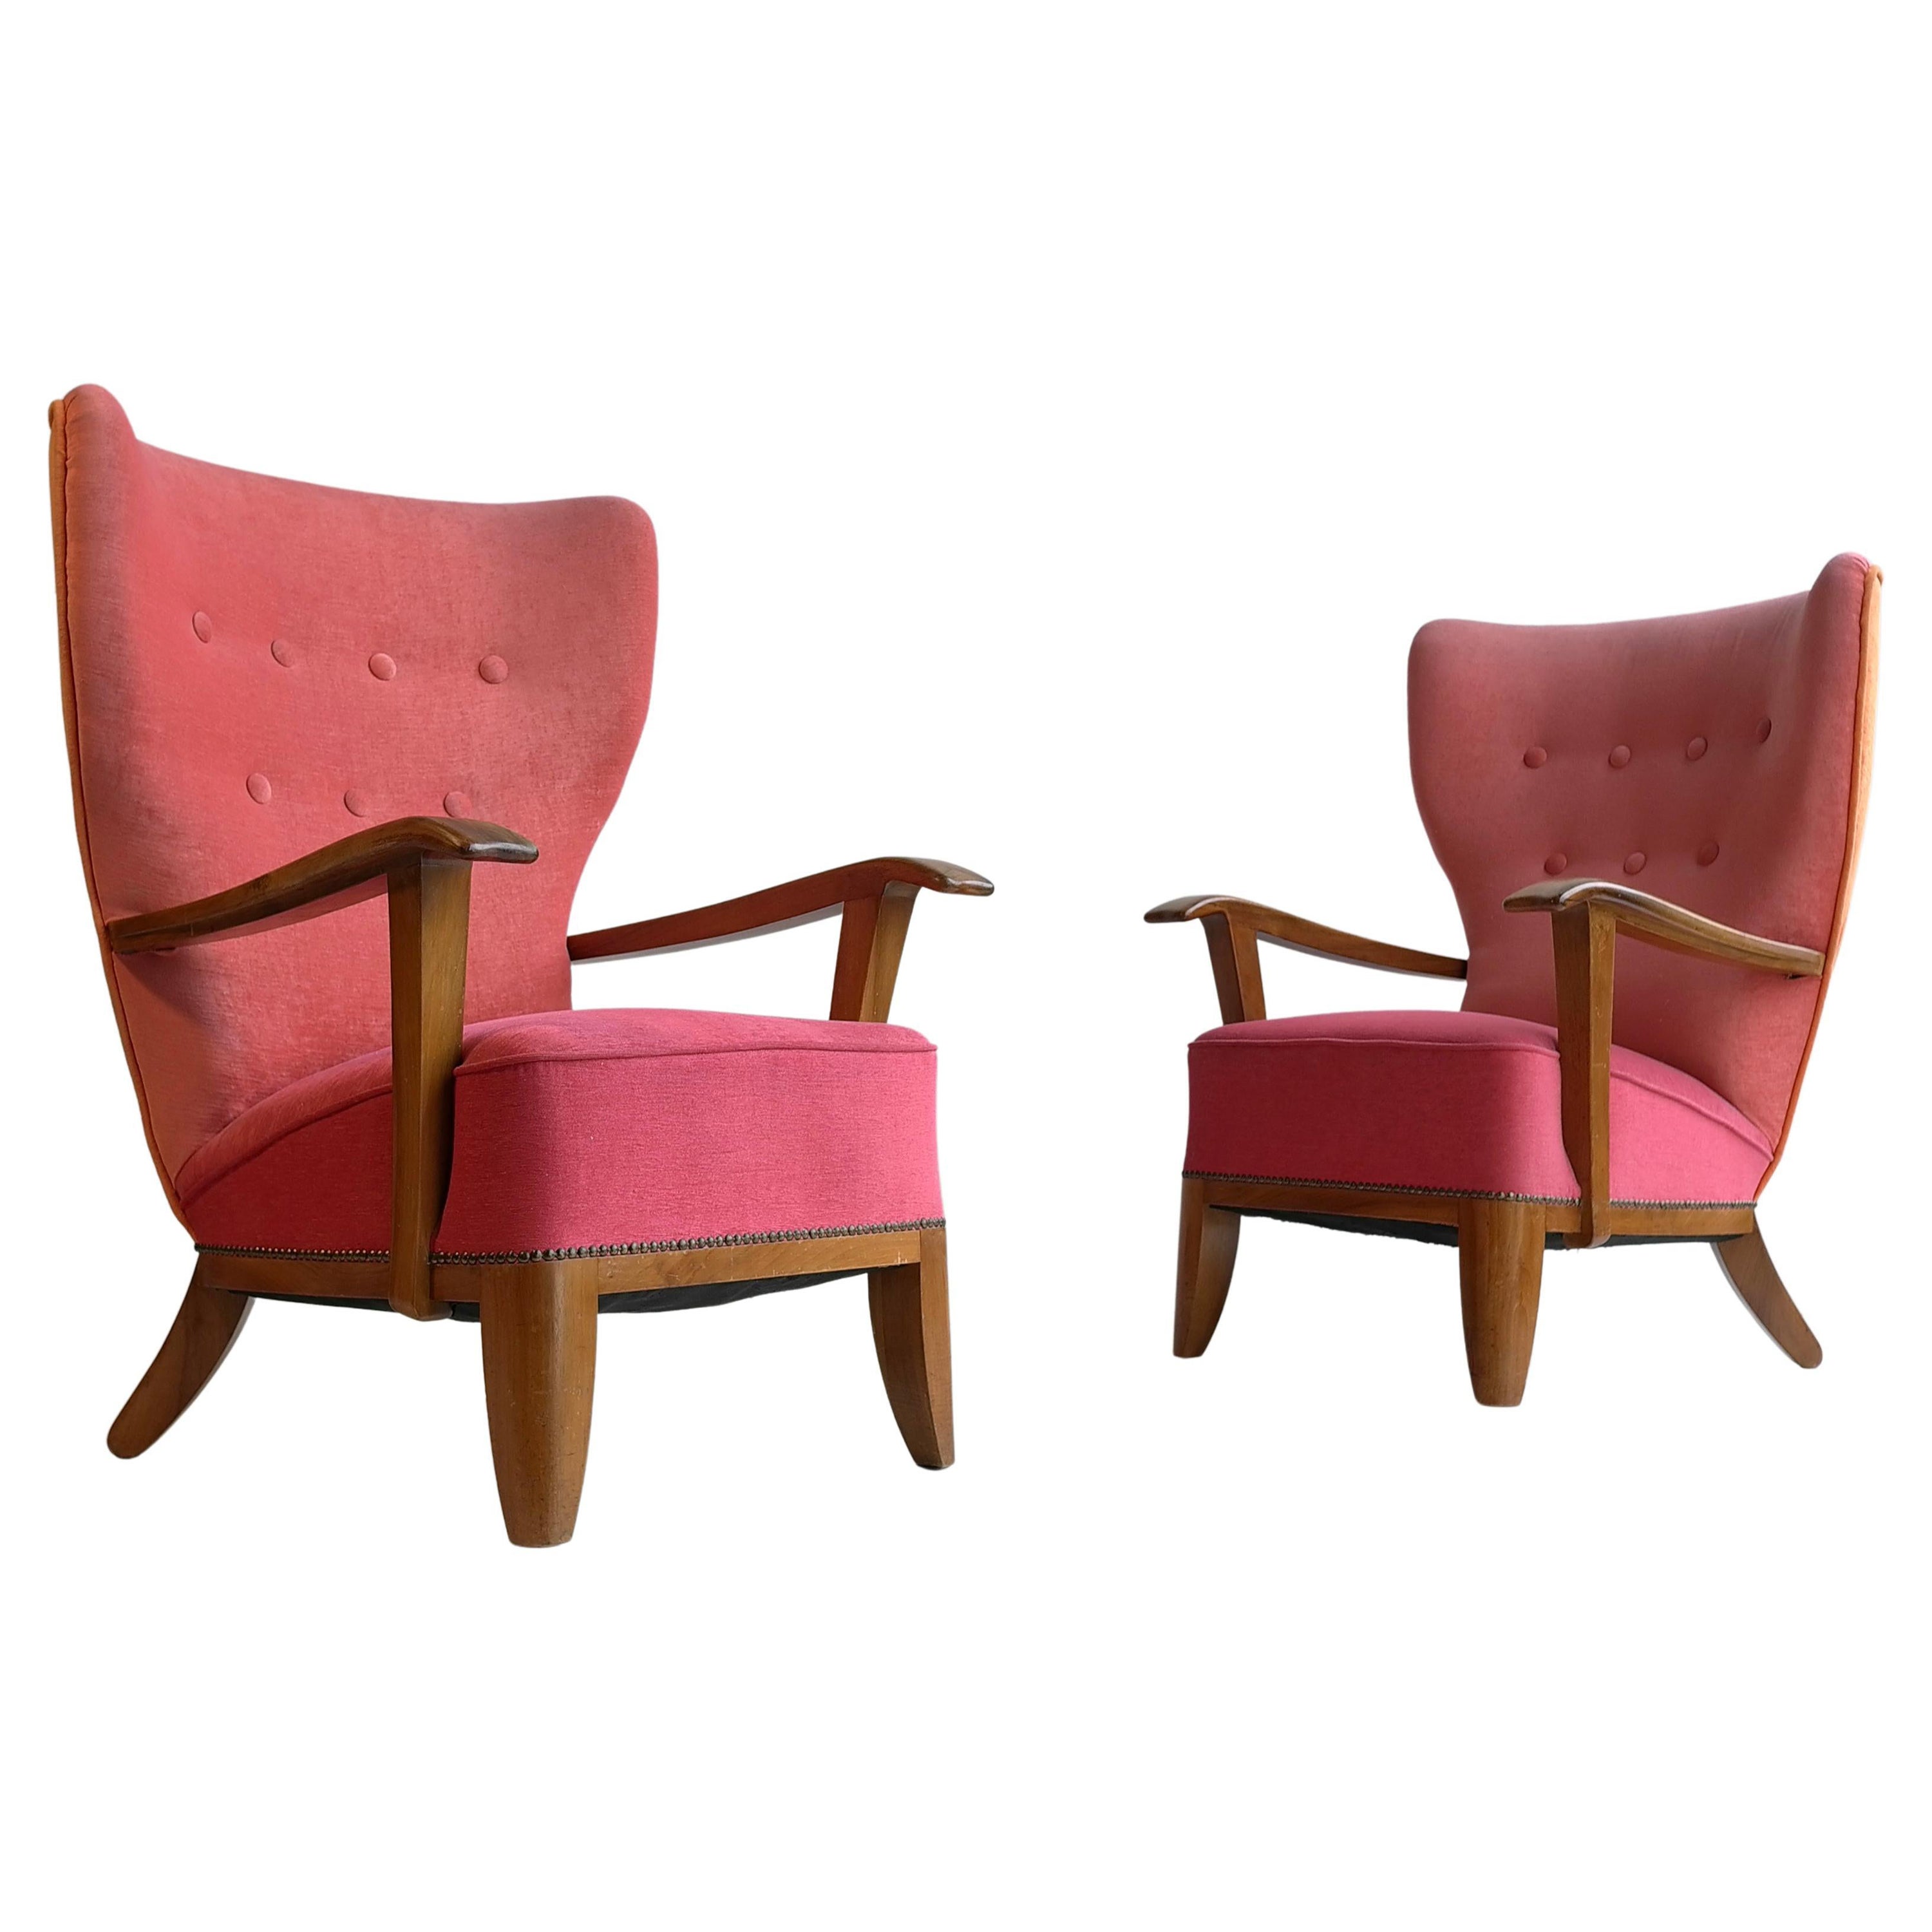 Pair of Three-Tone Mid-Century Modern Wingback Armchairs, France, 1948 For Sale